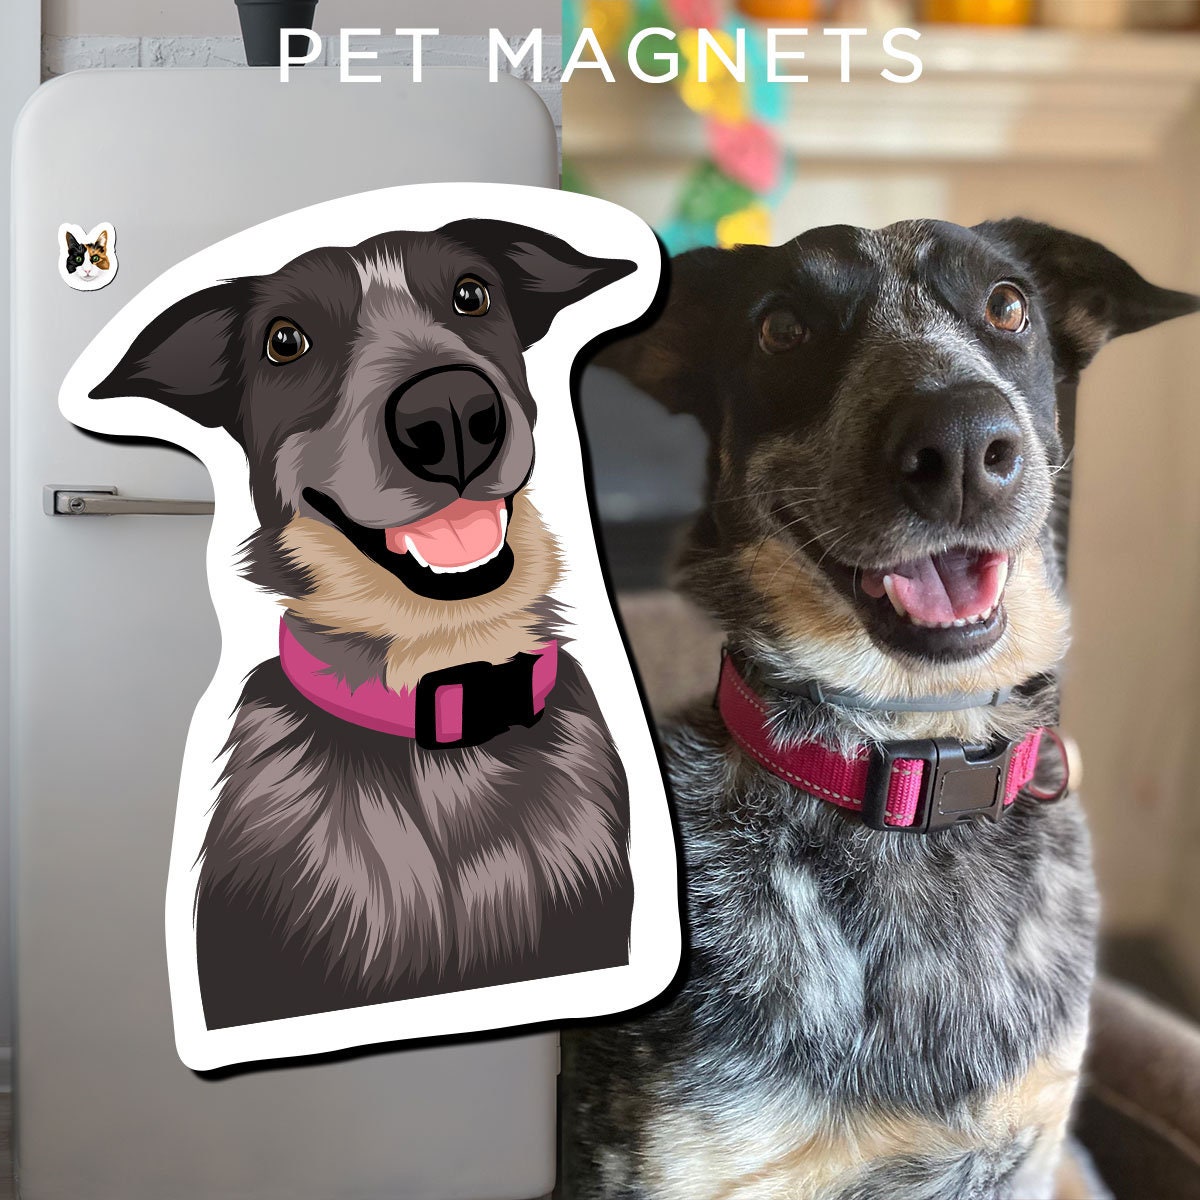 scared dog face Magnet for Sale by Petmemes